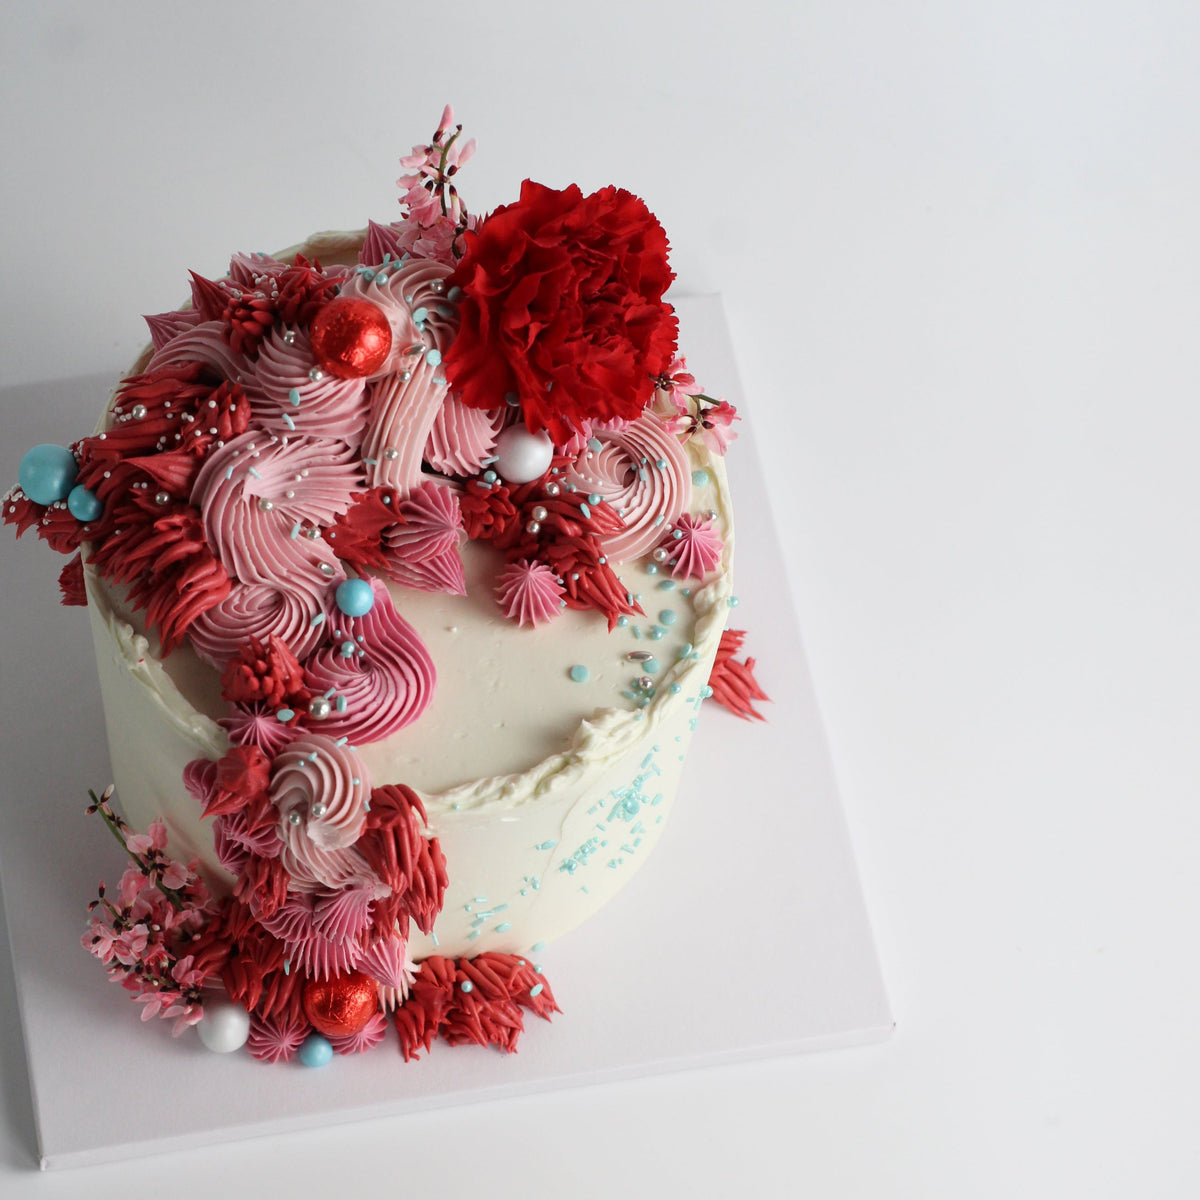 Our signature Shag Cake in red tones, covered in shaggy buttercream!